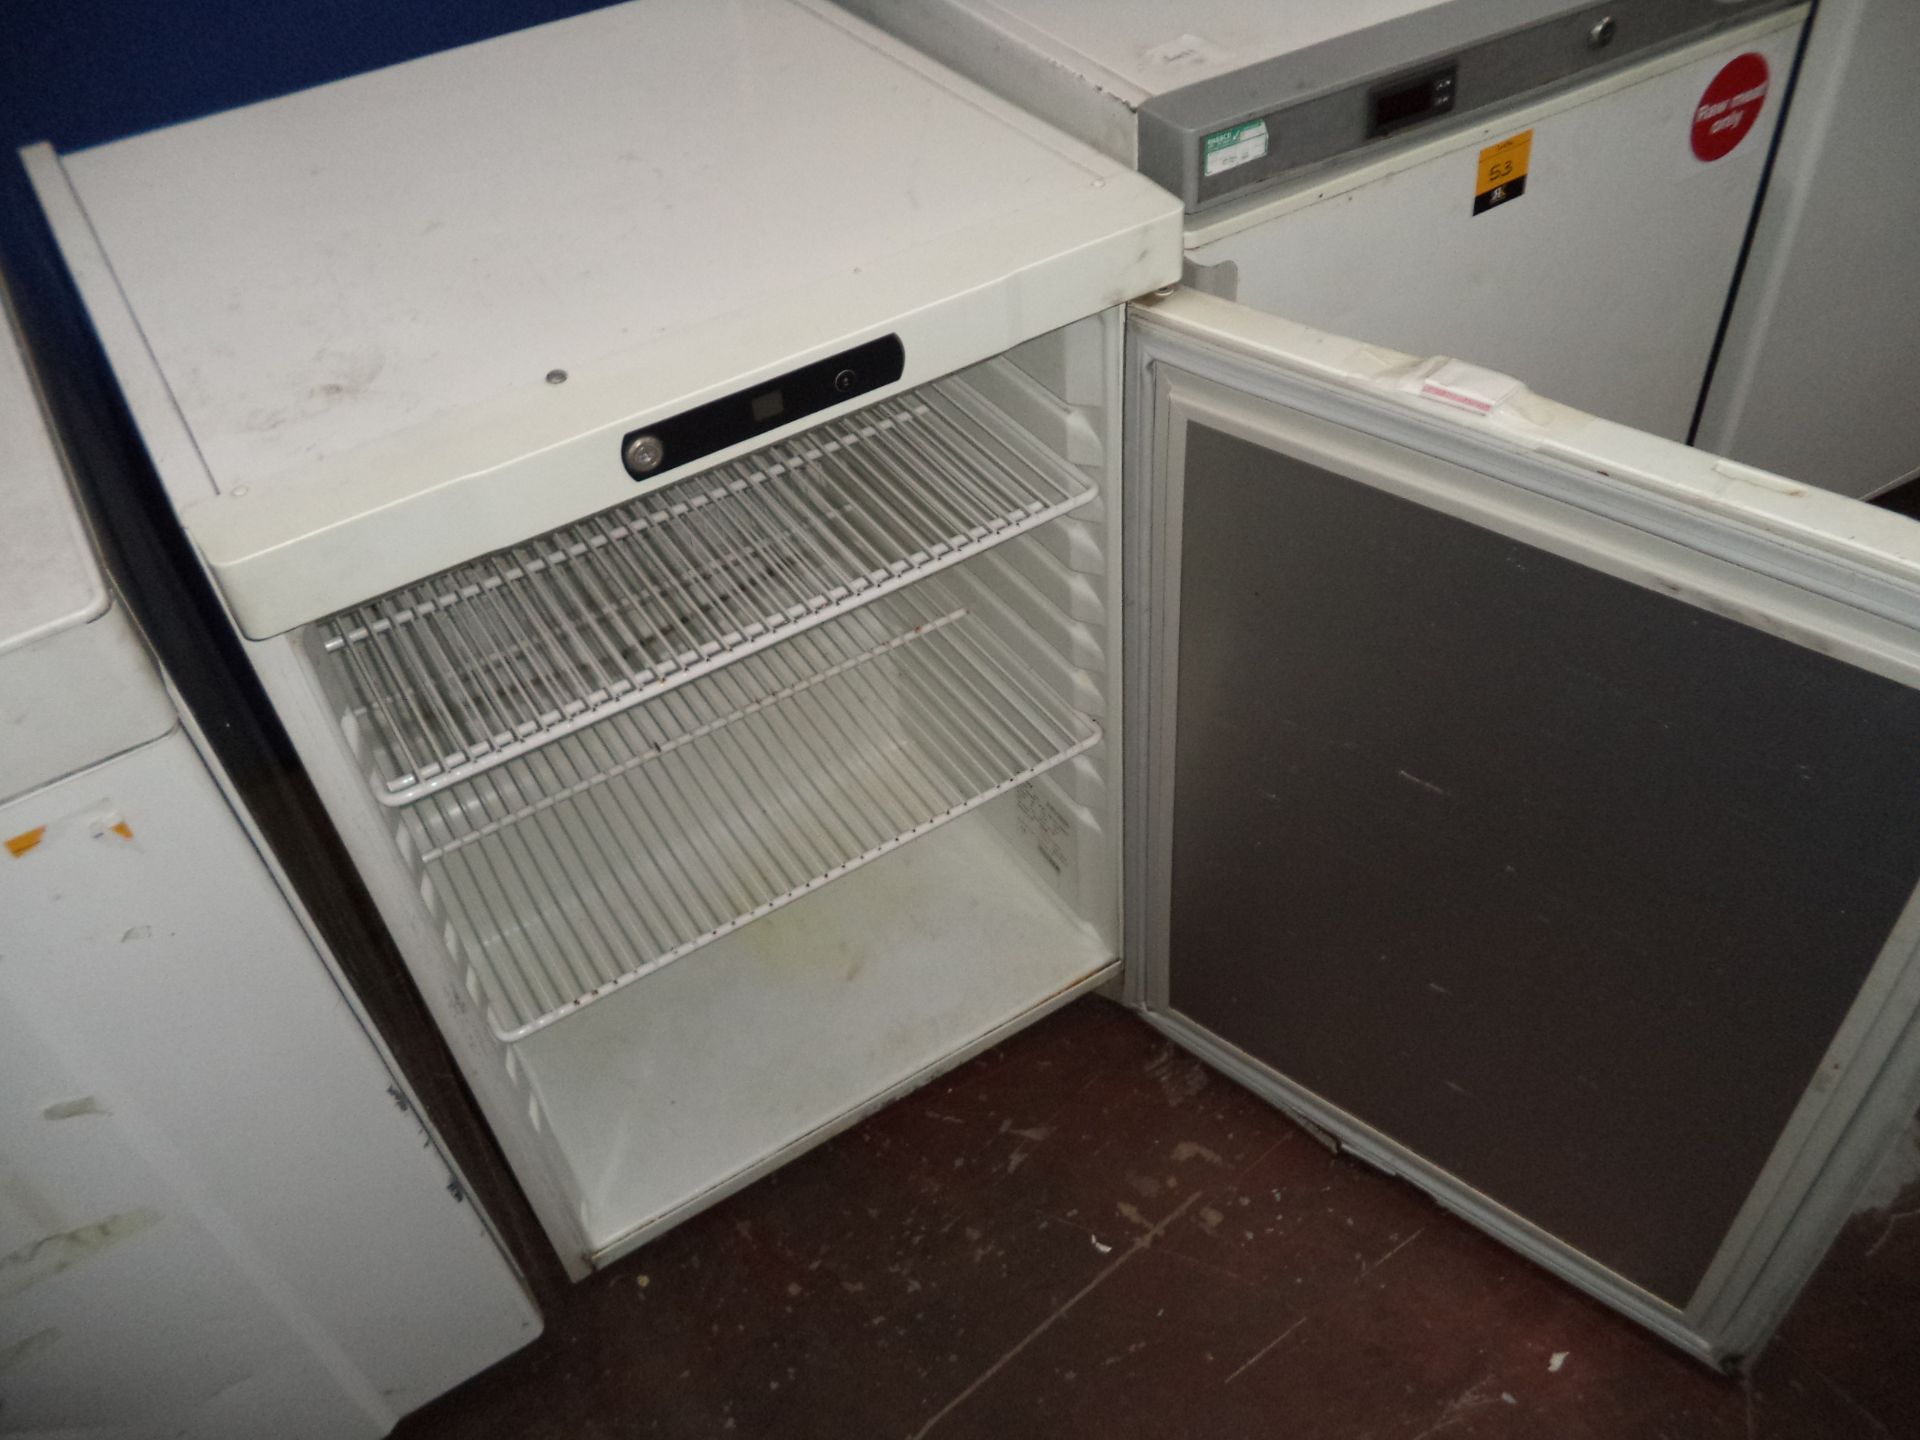 Gram counter height fridge, model K200 IMPORTANT: Please remember goods successfully bid upon must - Image 2 of 3